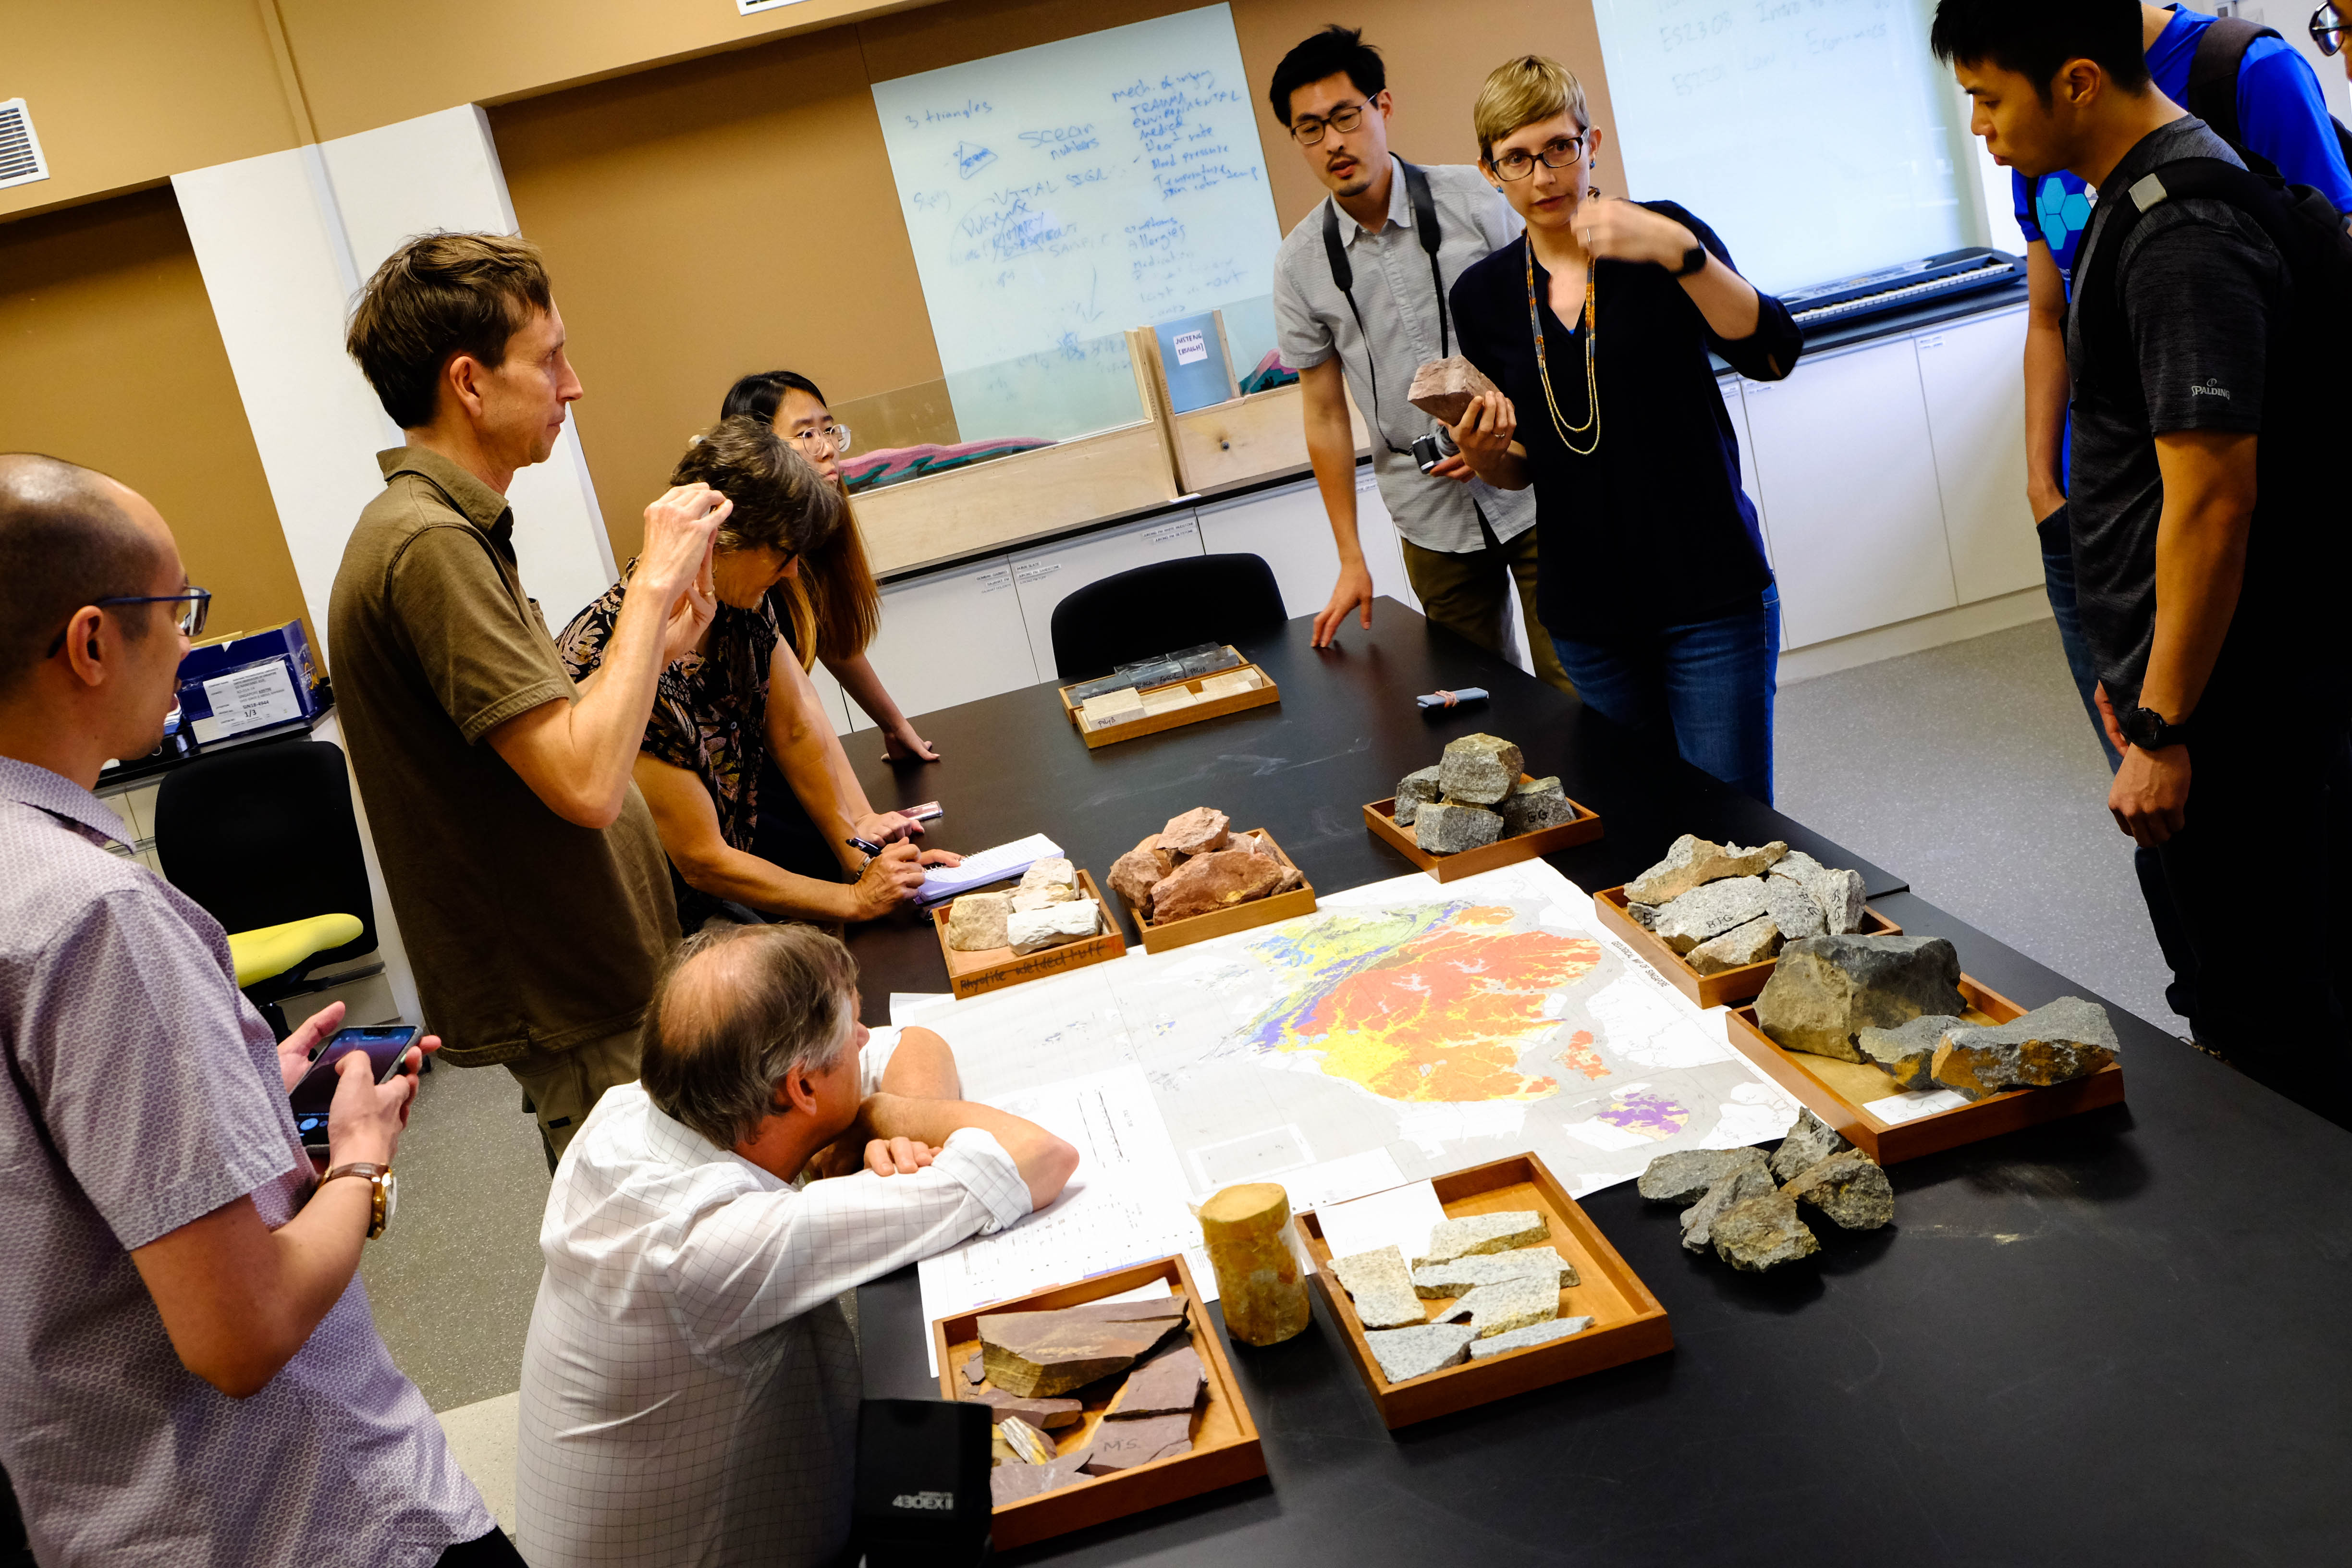 Dr Aurélie Coudurier Curveur, an EOS research fellow, showing the teams from Exploratorium and Science Centre the rocks collected from all over Singapore (Source: Kuang Jianhong/Earth Observatory of Singapore)